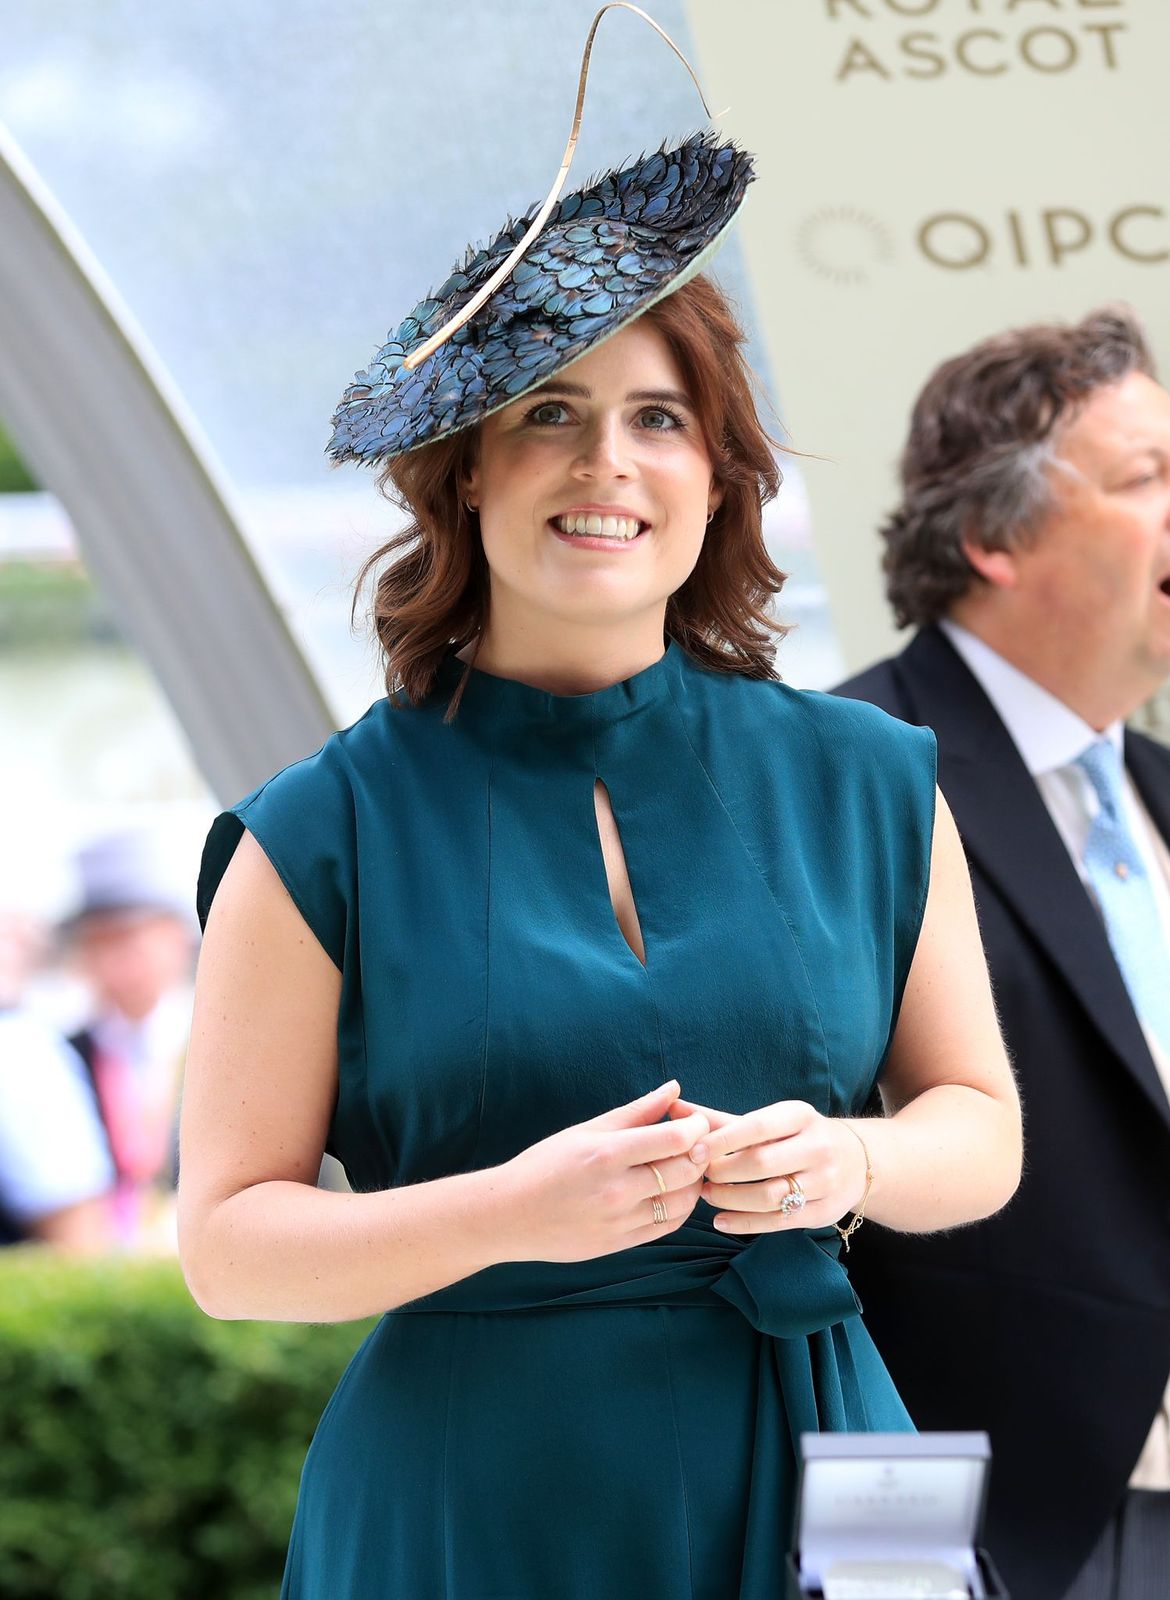 Princess Eugenie in the winner's enclosure during day three of the Royal Ascot at Ascot Racecourse on June 20, 2019 | Photo: Adam Davy/PA Images/Getty Images